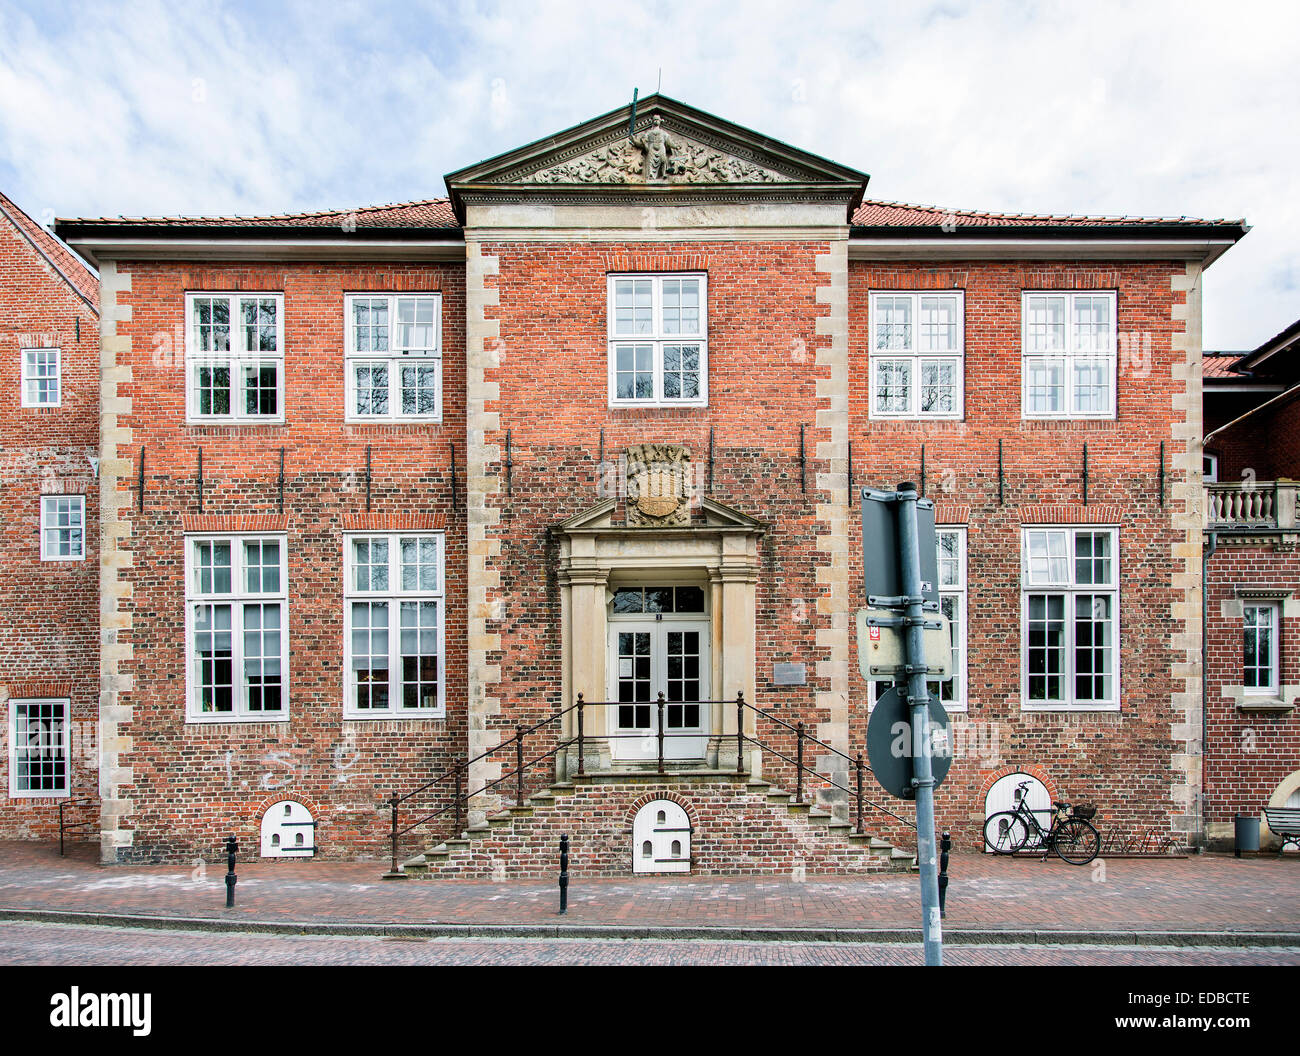 Local court, former judgement hall, Jever, Frisia, Lower Saxony, Germany Stock Photo